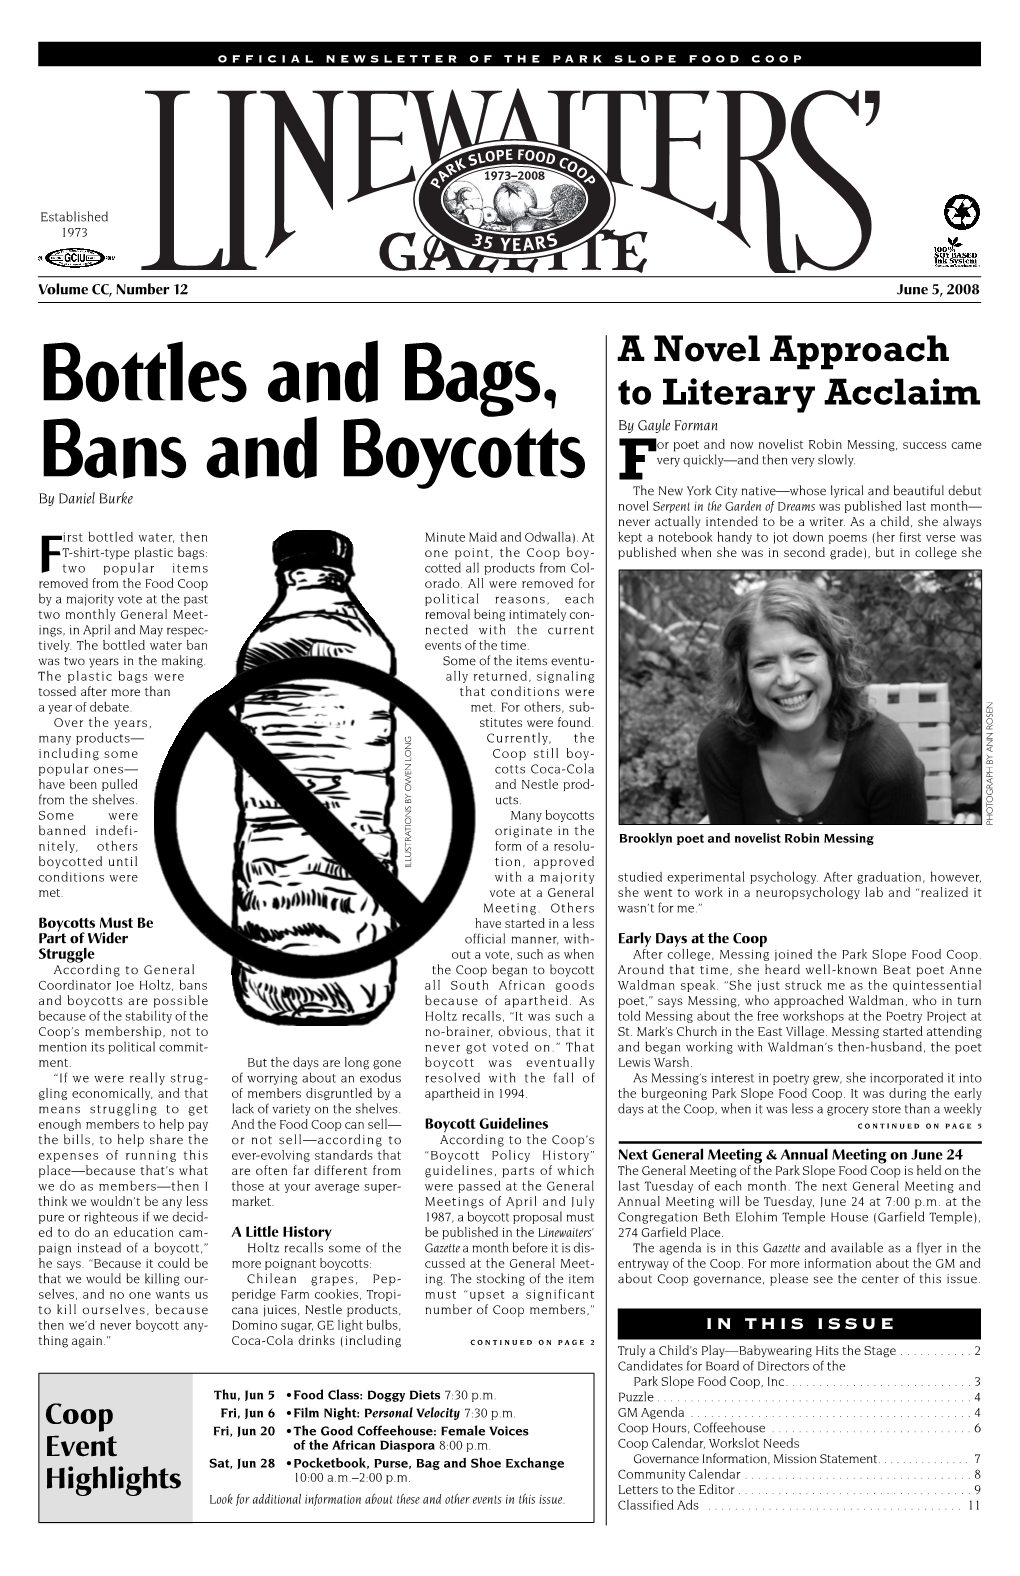 Bottles and Bags, Bans \And Boycotts